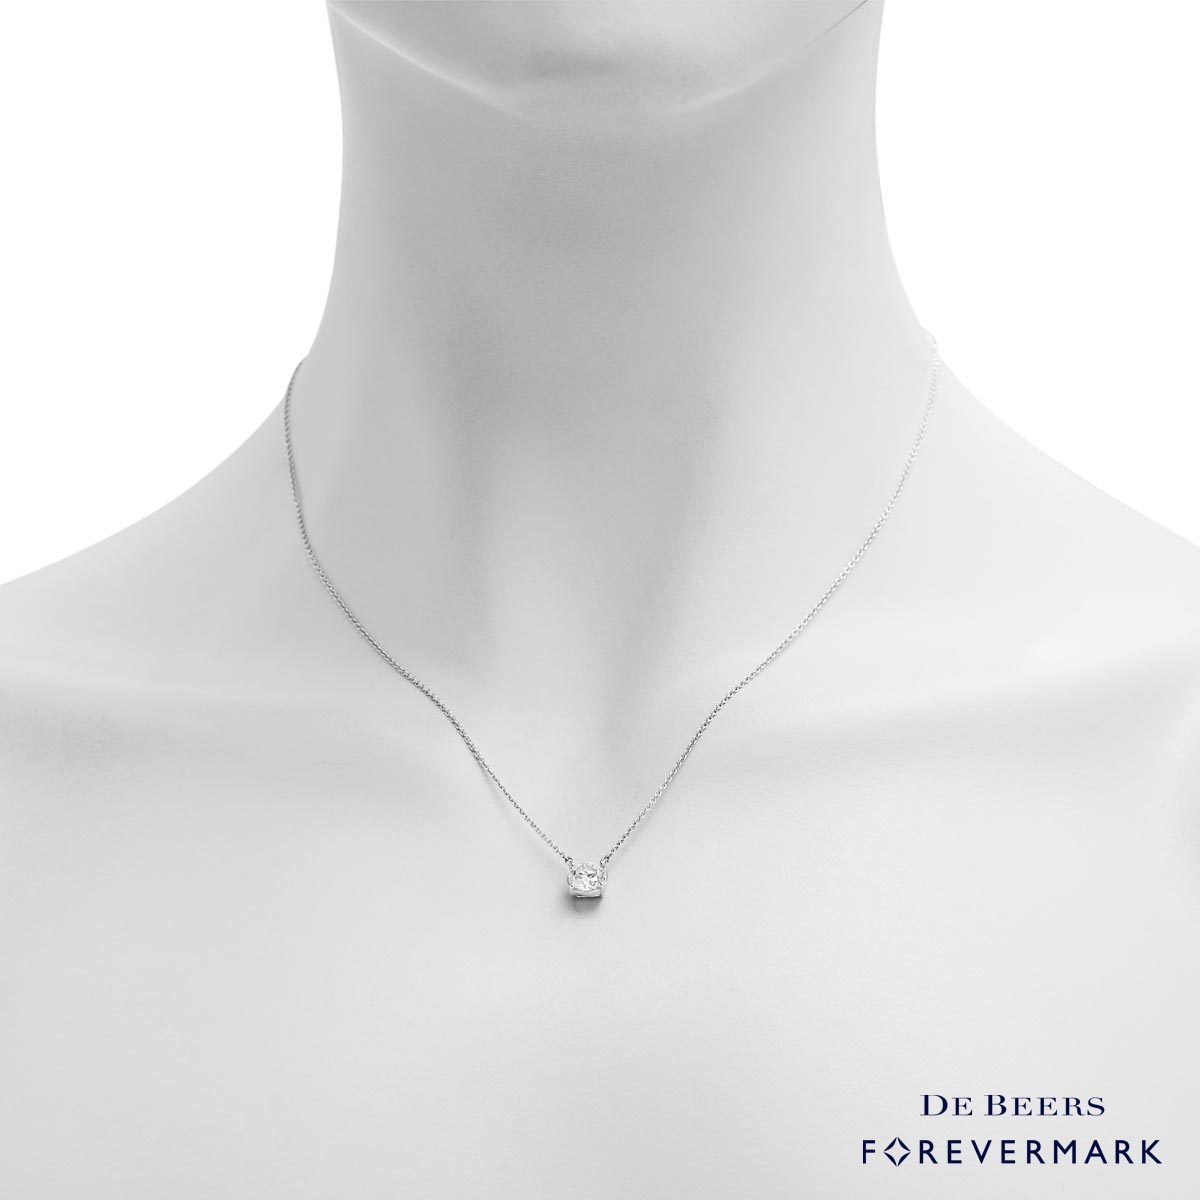 De Beers Forevermark Diamond Solitaire Necklace in 18kt White Gold (1.01ct)